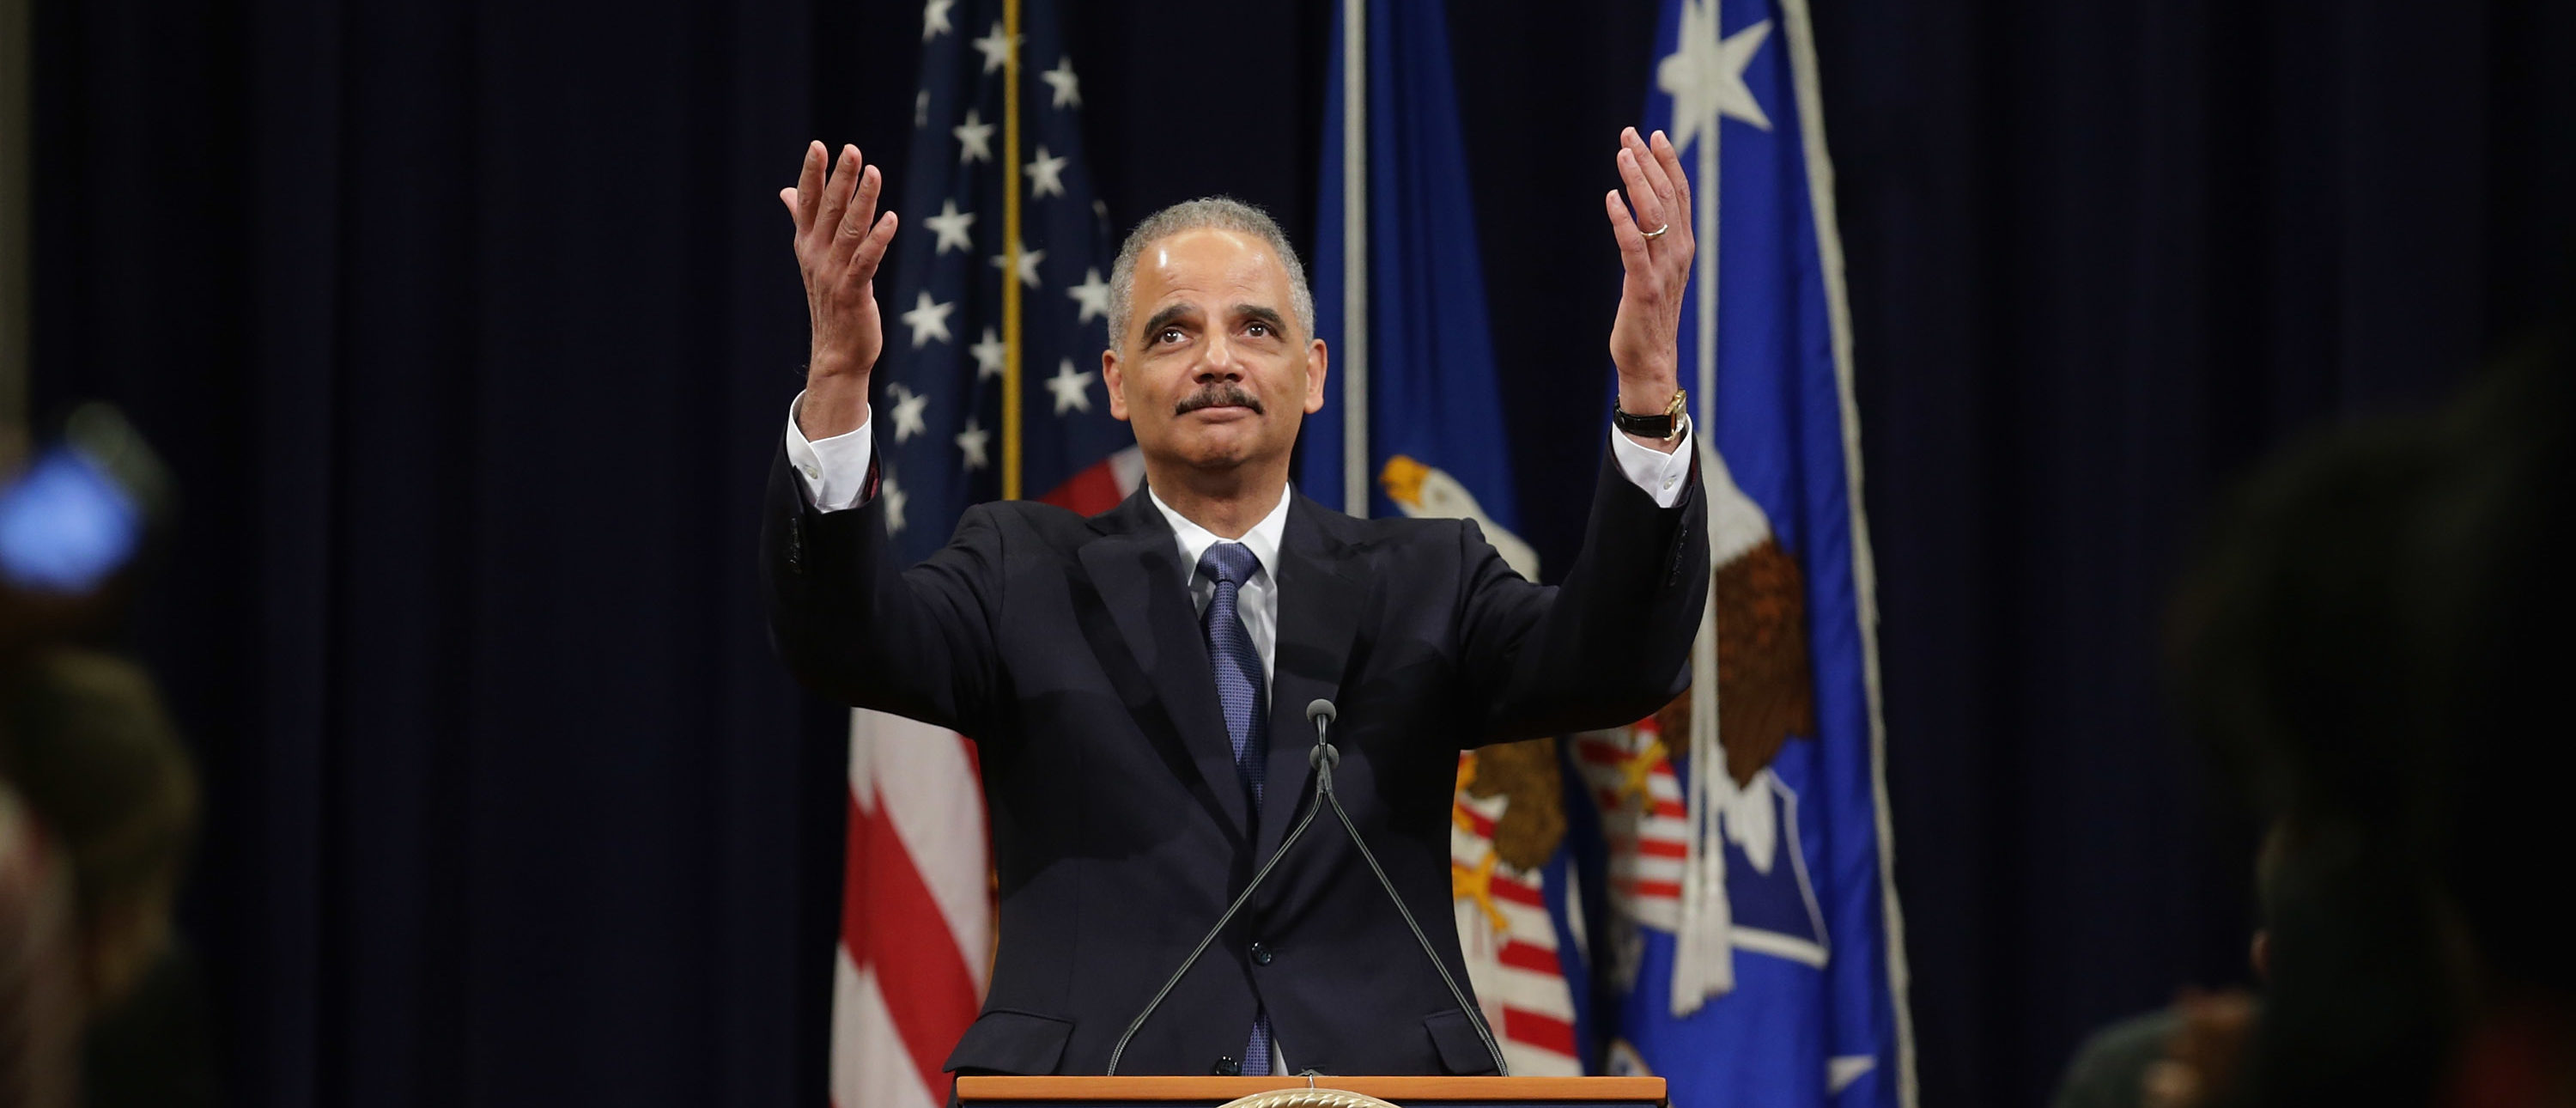 WASHINGTON, DC - APRIL 24: U.S. Attorney General Eric Holder thanks Justice Department employees as he delivers his parting remarks at the Robert F. Kennedy building April 24, 2015 in Washington, DC. The first African American attorney general in U.S. history, Holder is leaving his post as the country's highest ranking law enforcement official after six years on the job and will be succeeded by Loretta Lynch. (Photo by Chip Somodevilla/Getty Images)